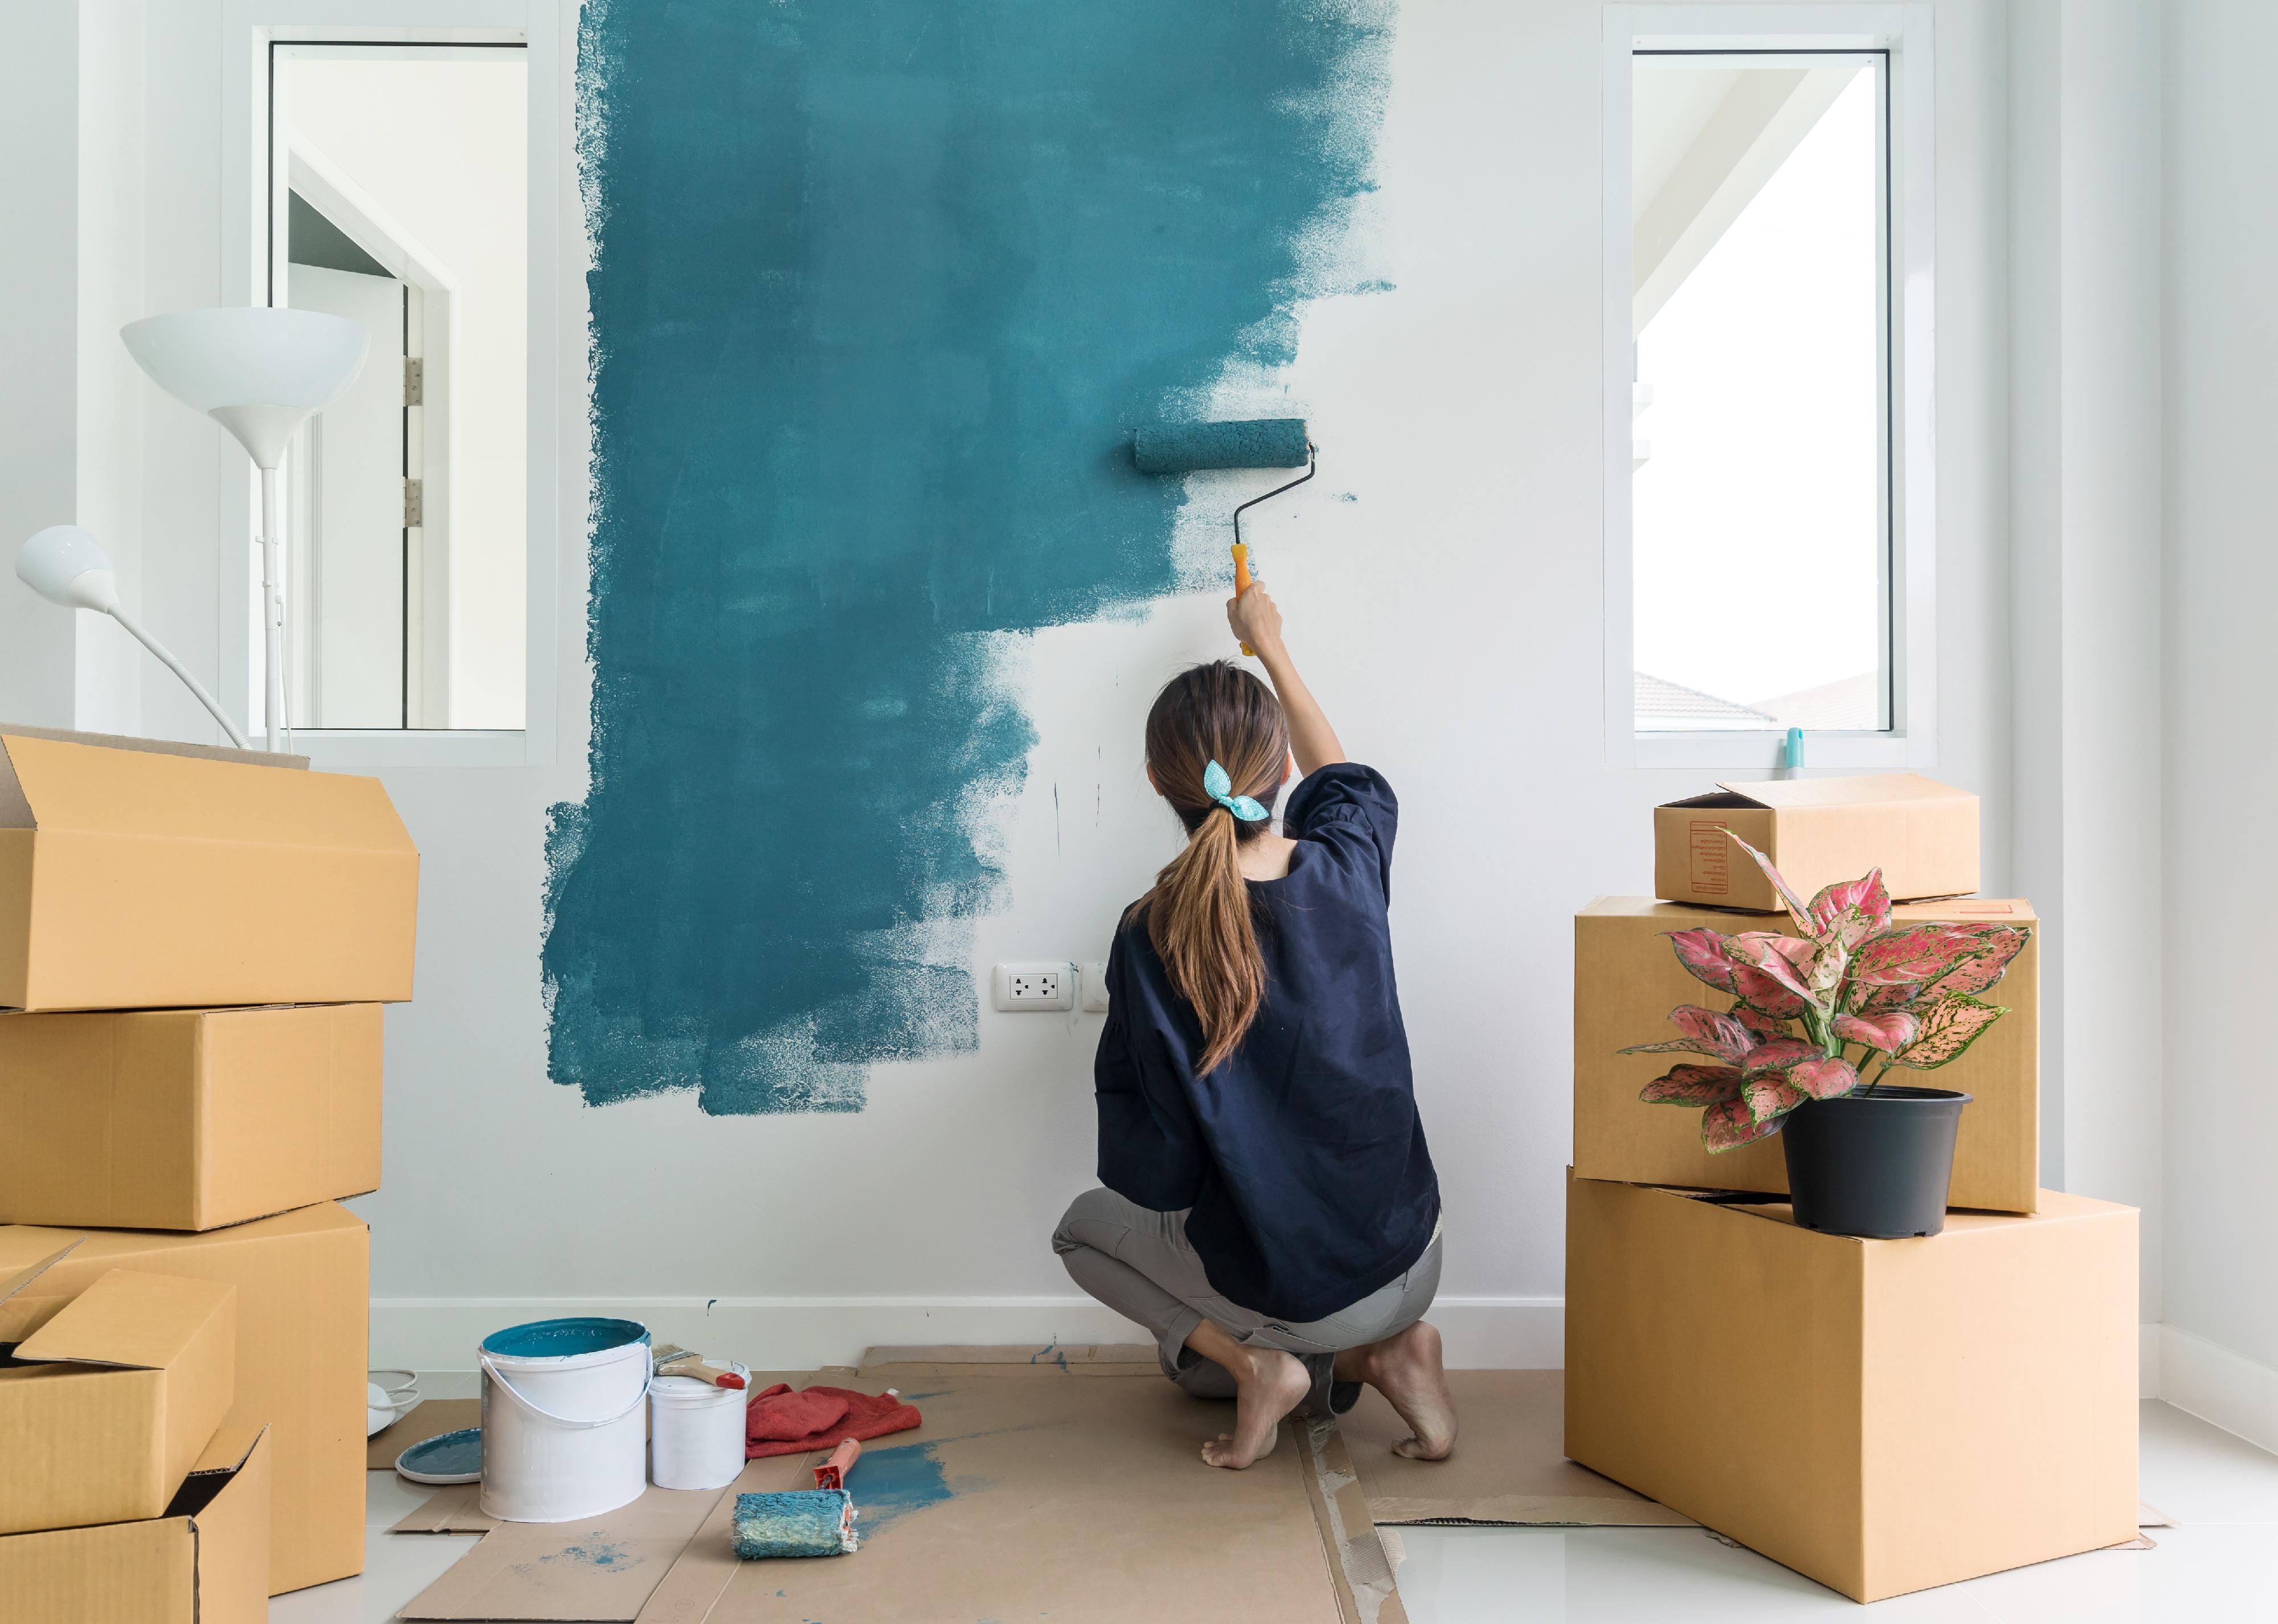 An image of a young woman renovating her home by painting a wall with teal-green paint color